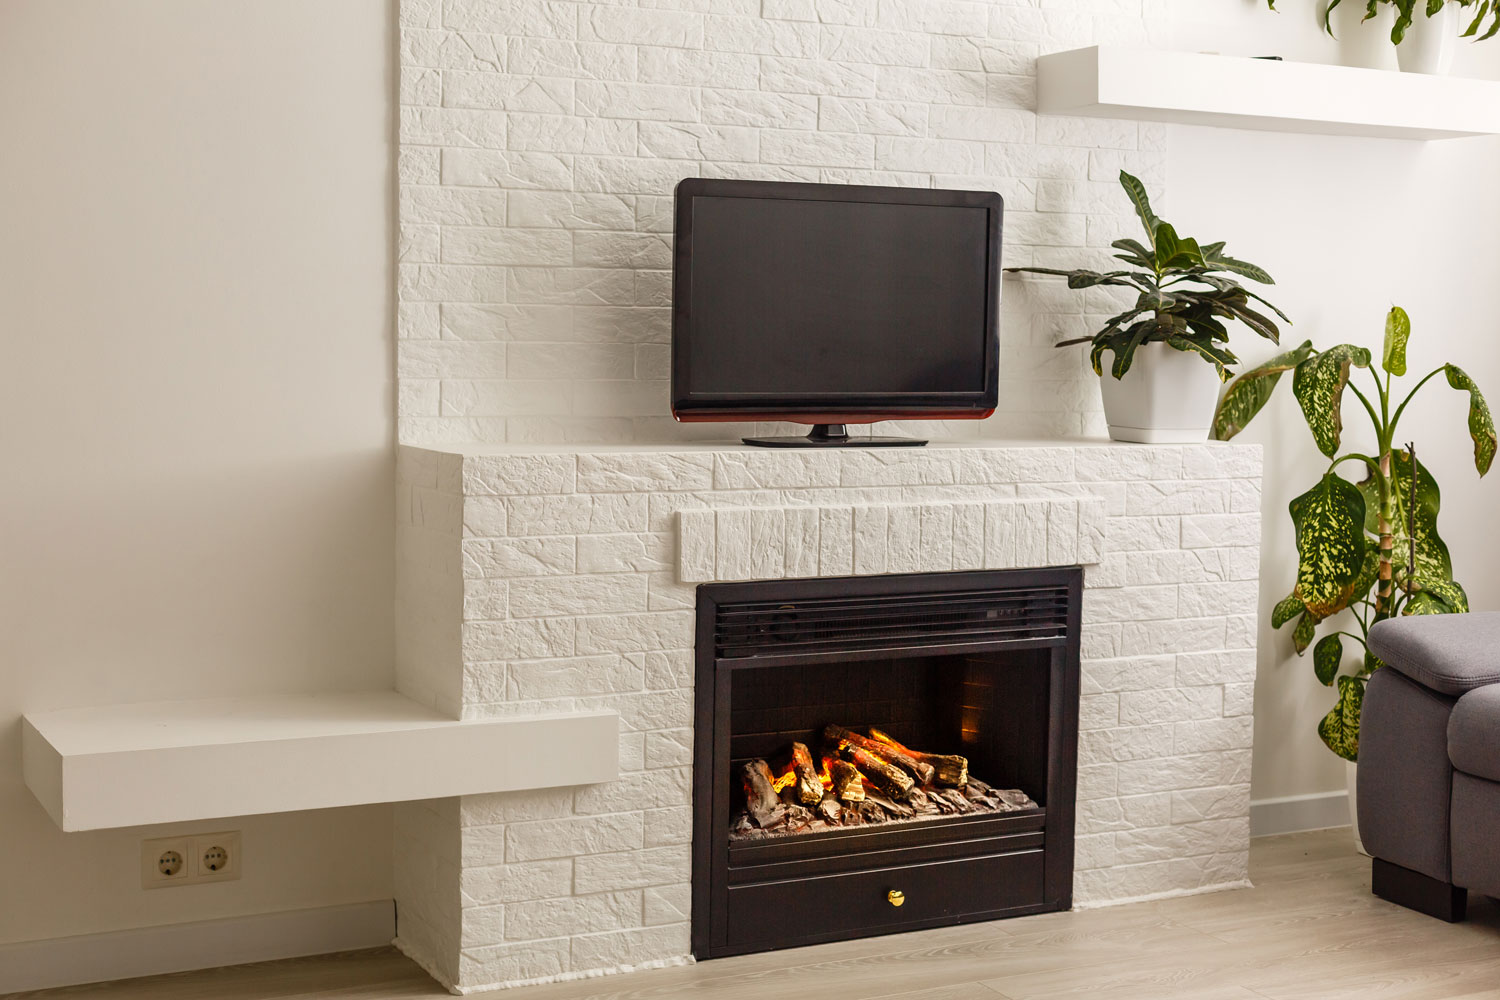 White stone cladding on the fireplace with a TV on the fireplace mantel